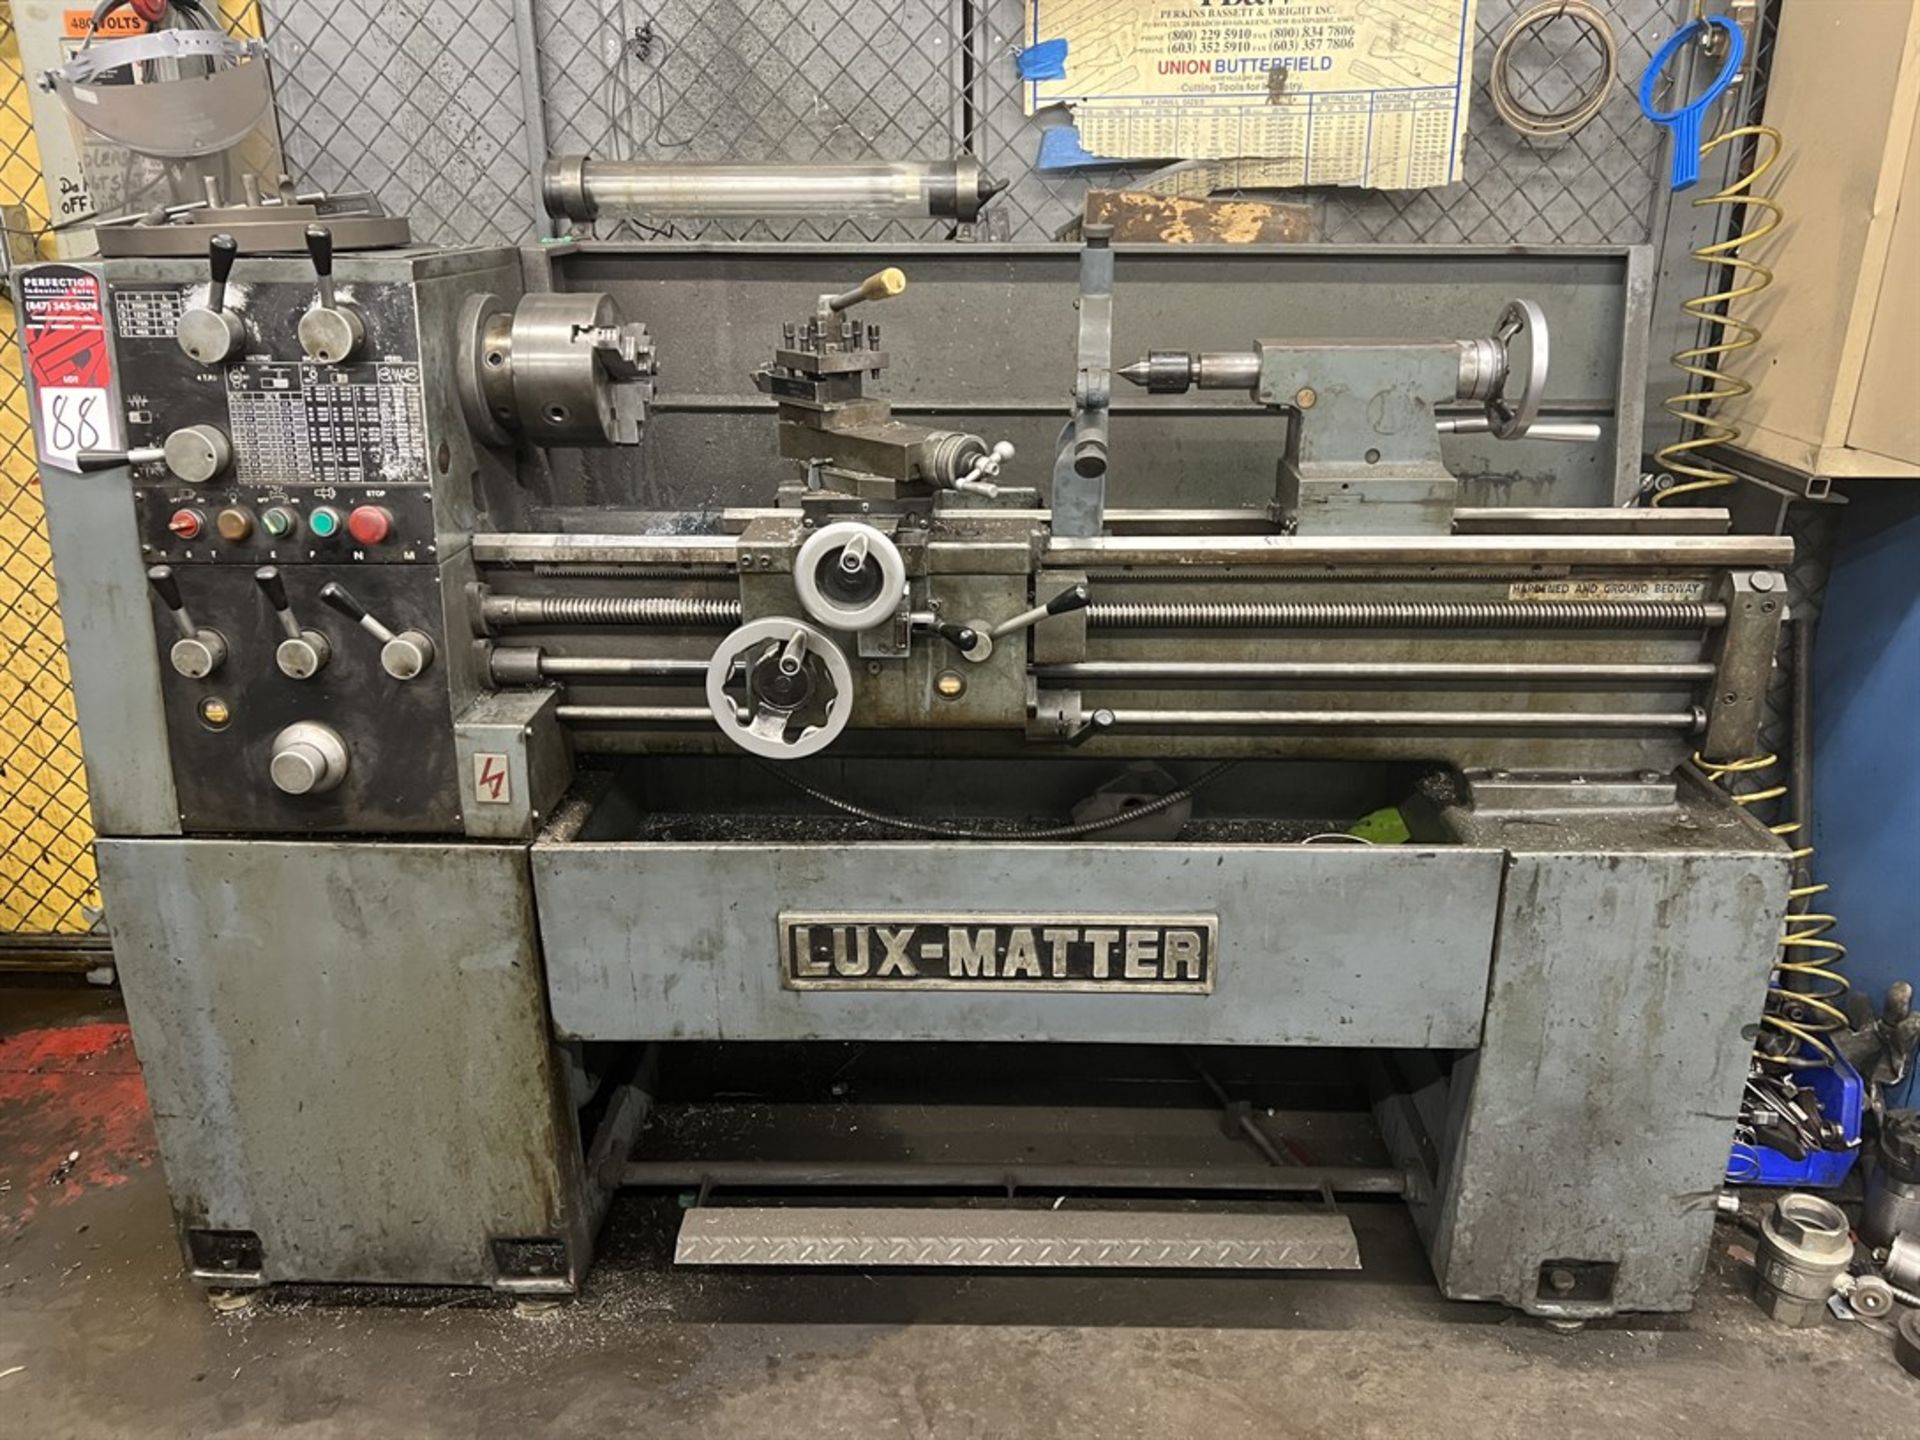 LUX-MATTER Lathe, s/n an, 14” Swing x 36” Between Centers, 6” 3-Jaw Chuck, Quick Change Tool Post,